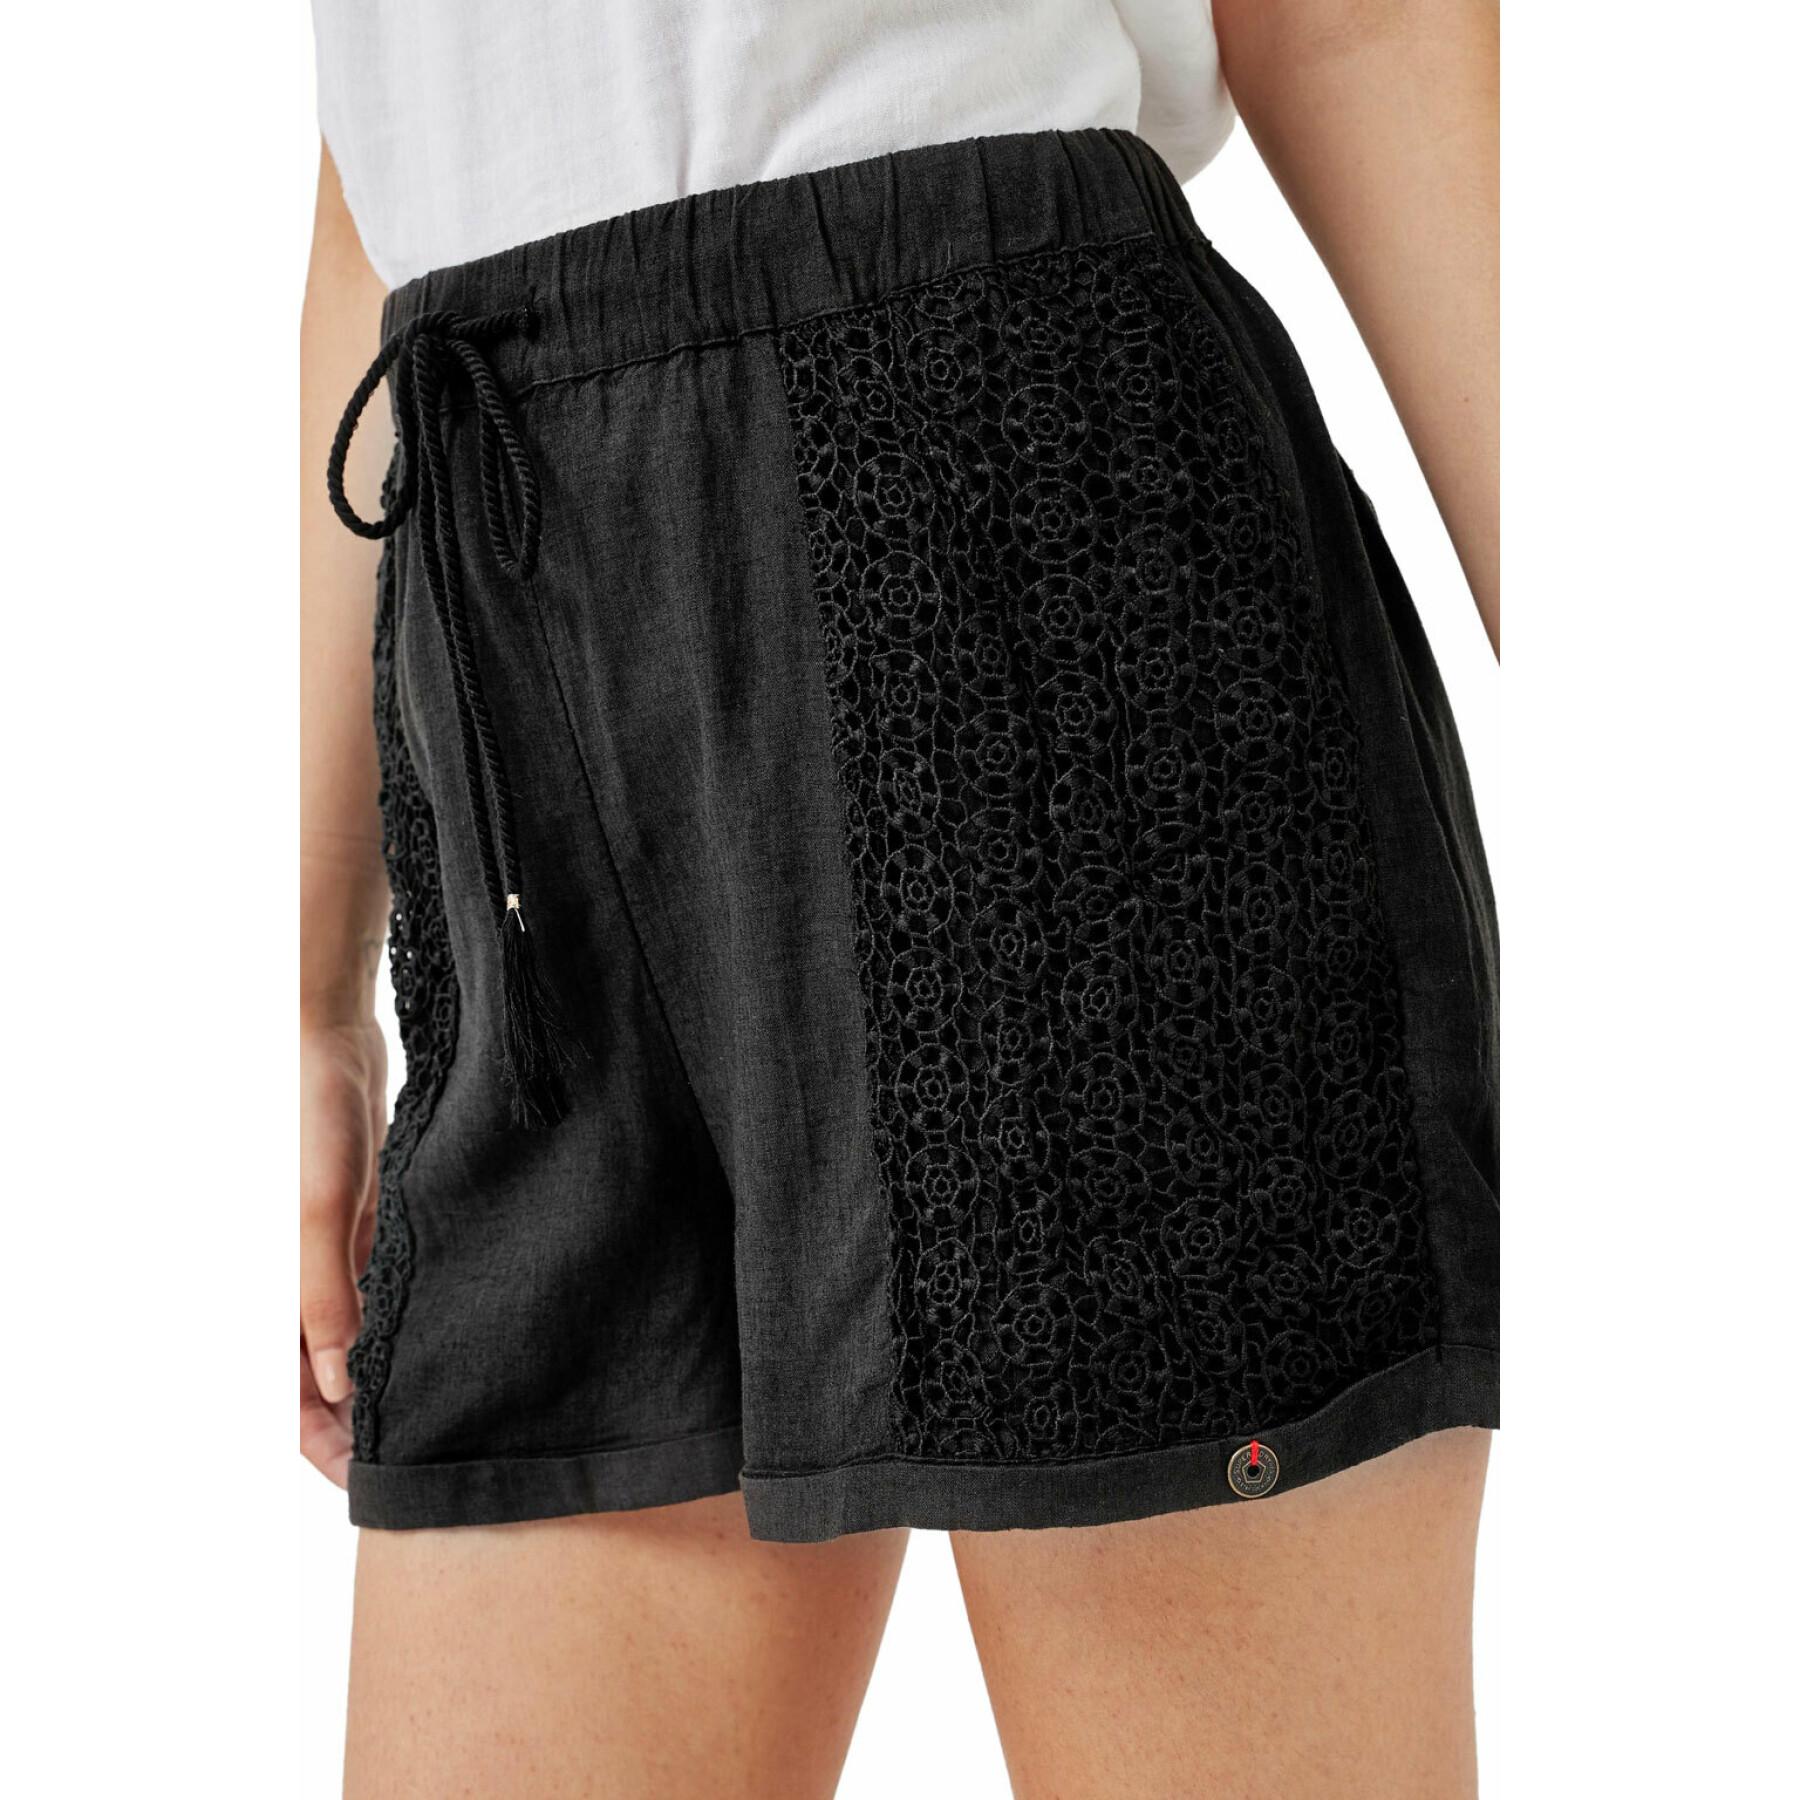 Women's lace shorts Superdry